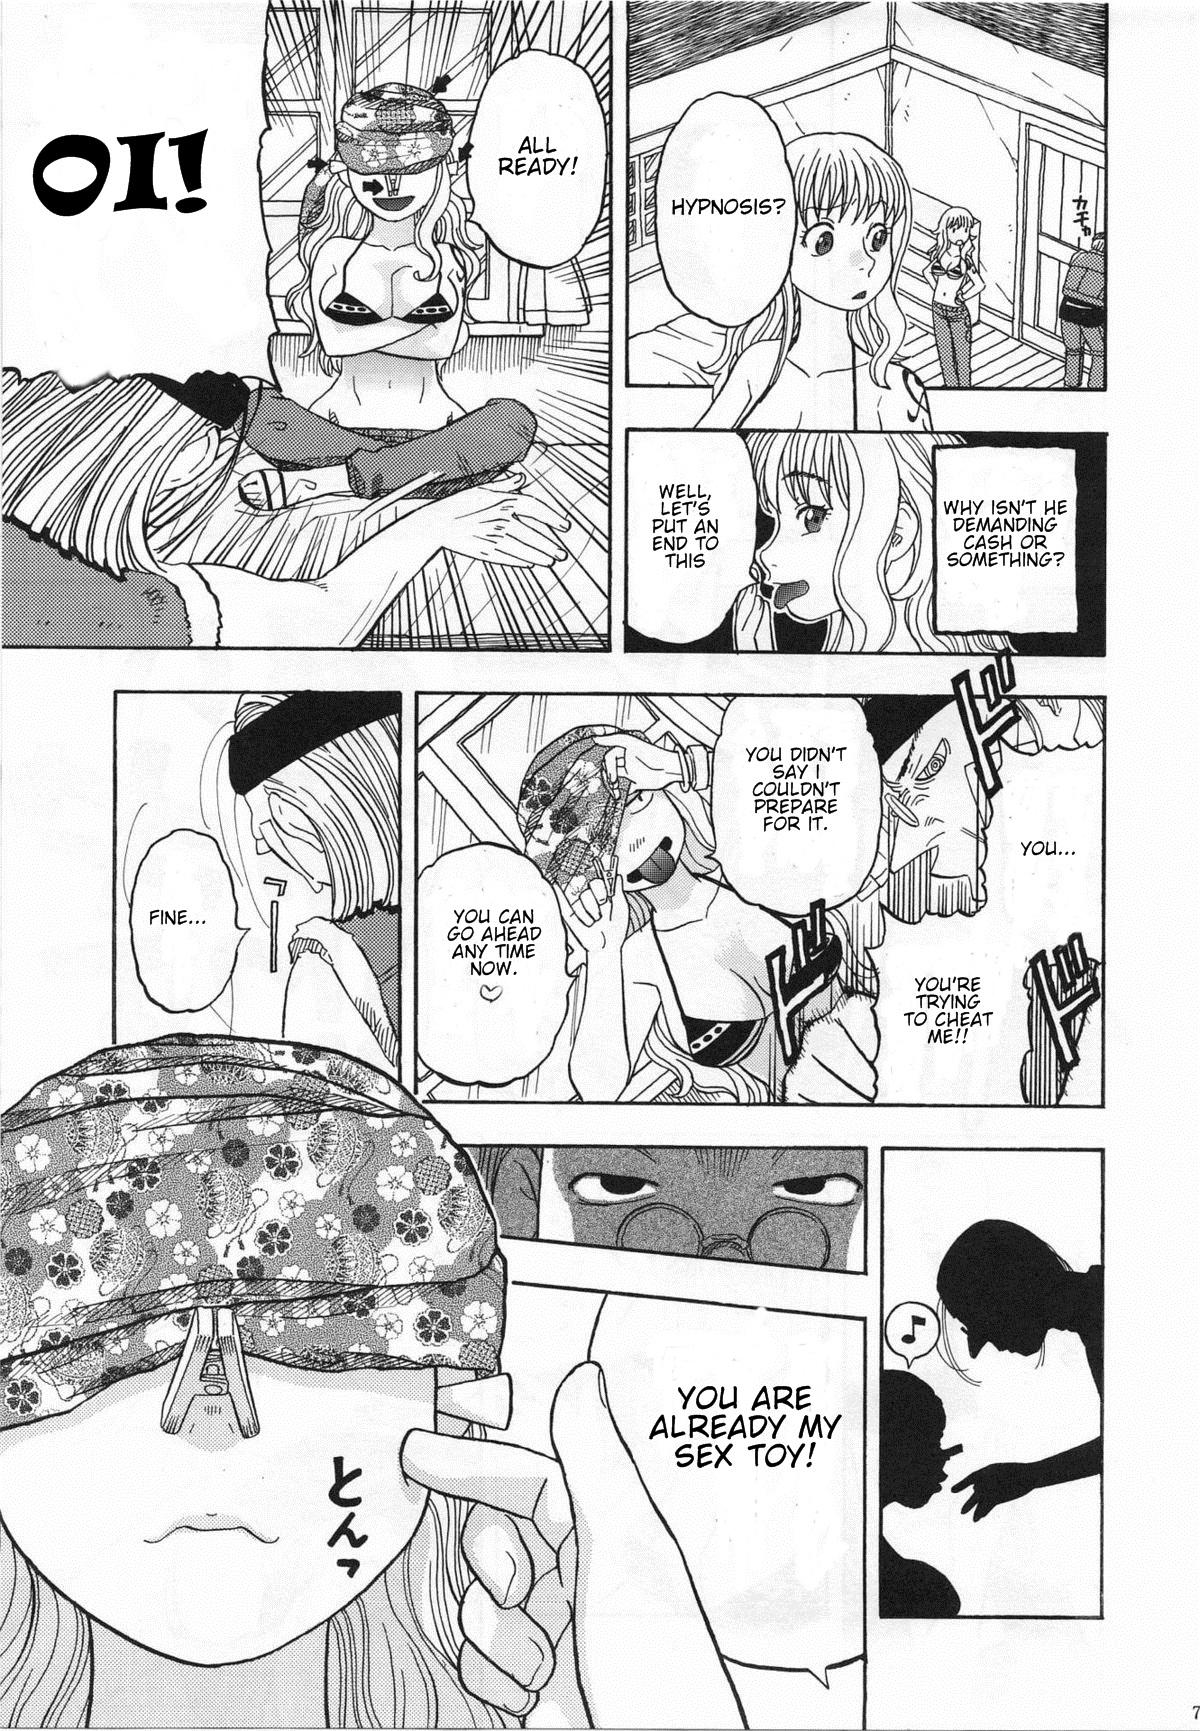 Black Nami no Iinari Saimin | Nami's Submission Hypnosis - One piece Massages - Page 4